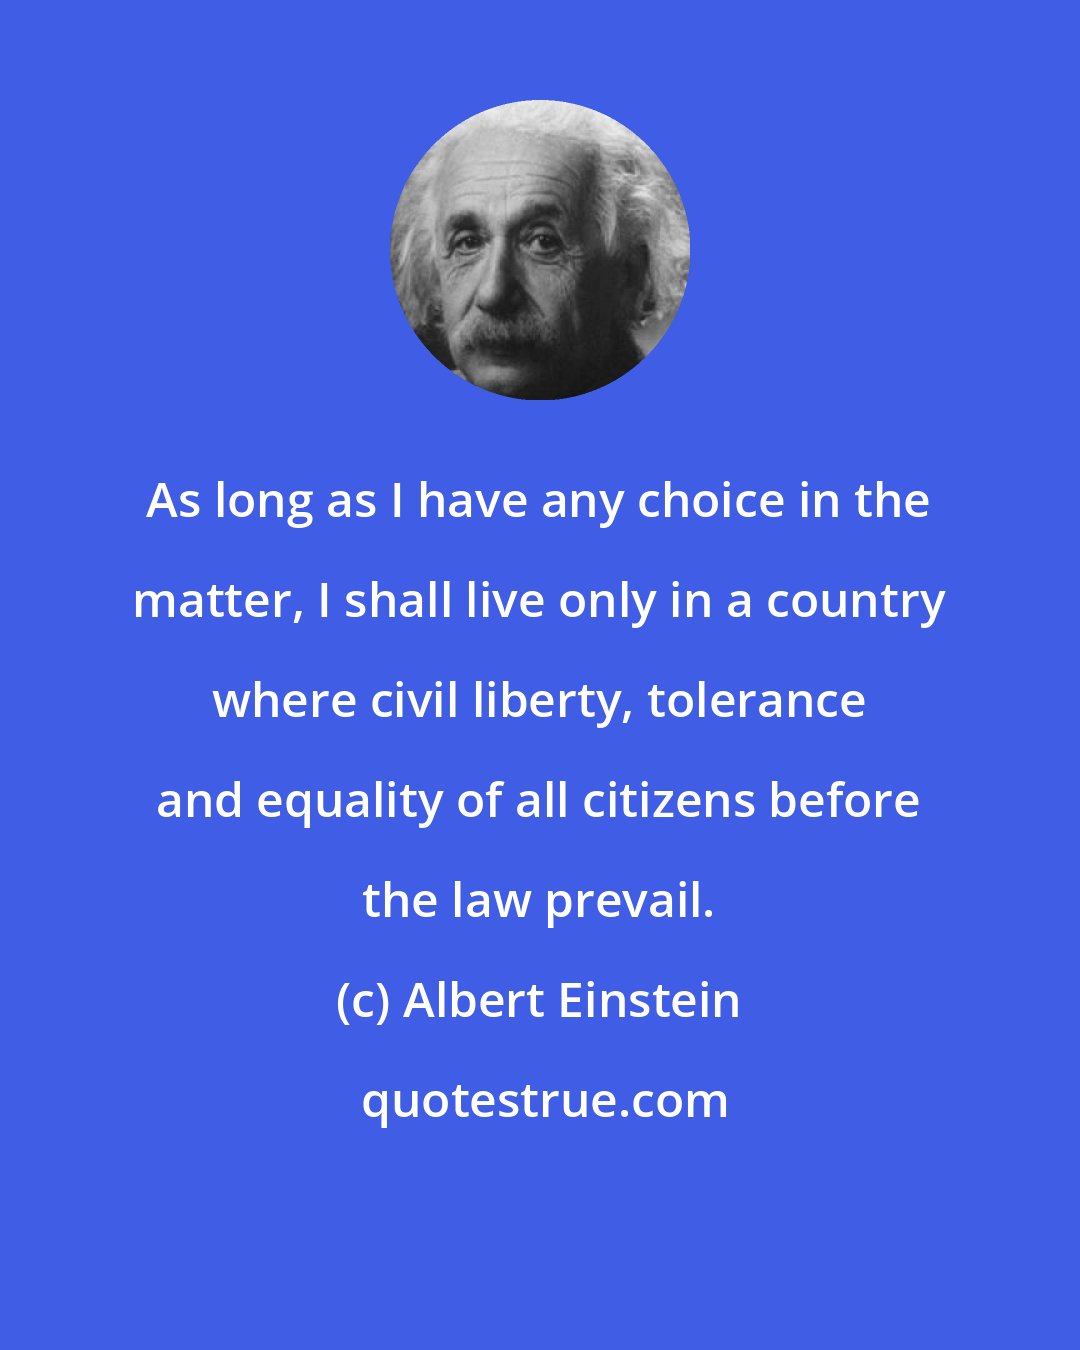 Albert Einstein: As long as I have any choice in the matter, I shall live only in a country where civil liberty, tolerance and equality of all citizens before the law prevail.